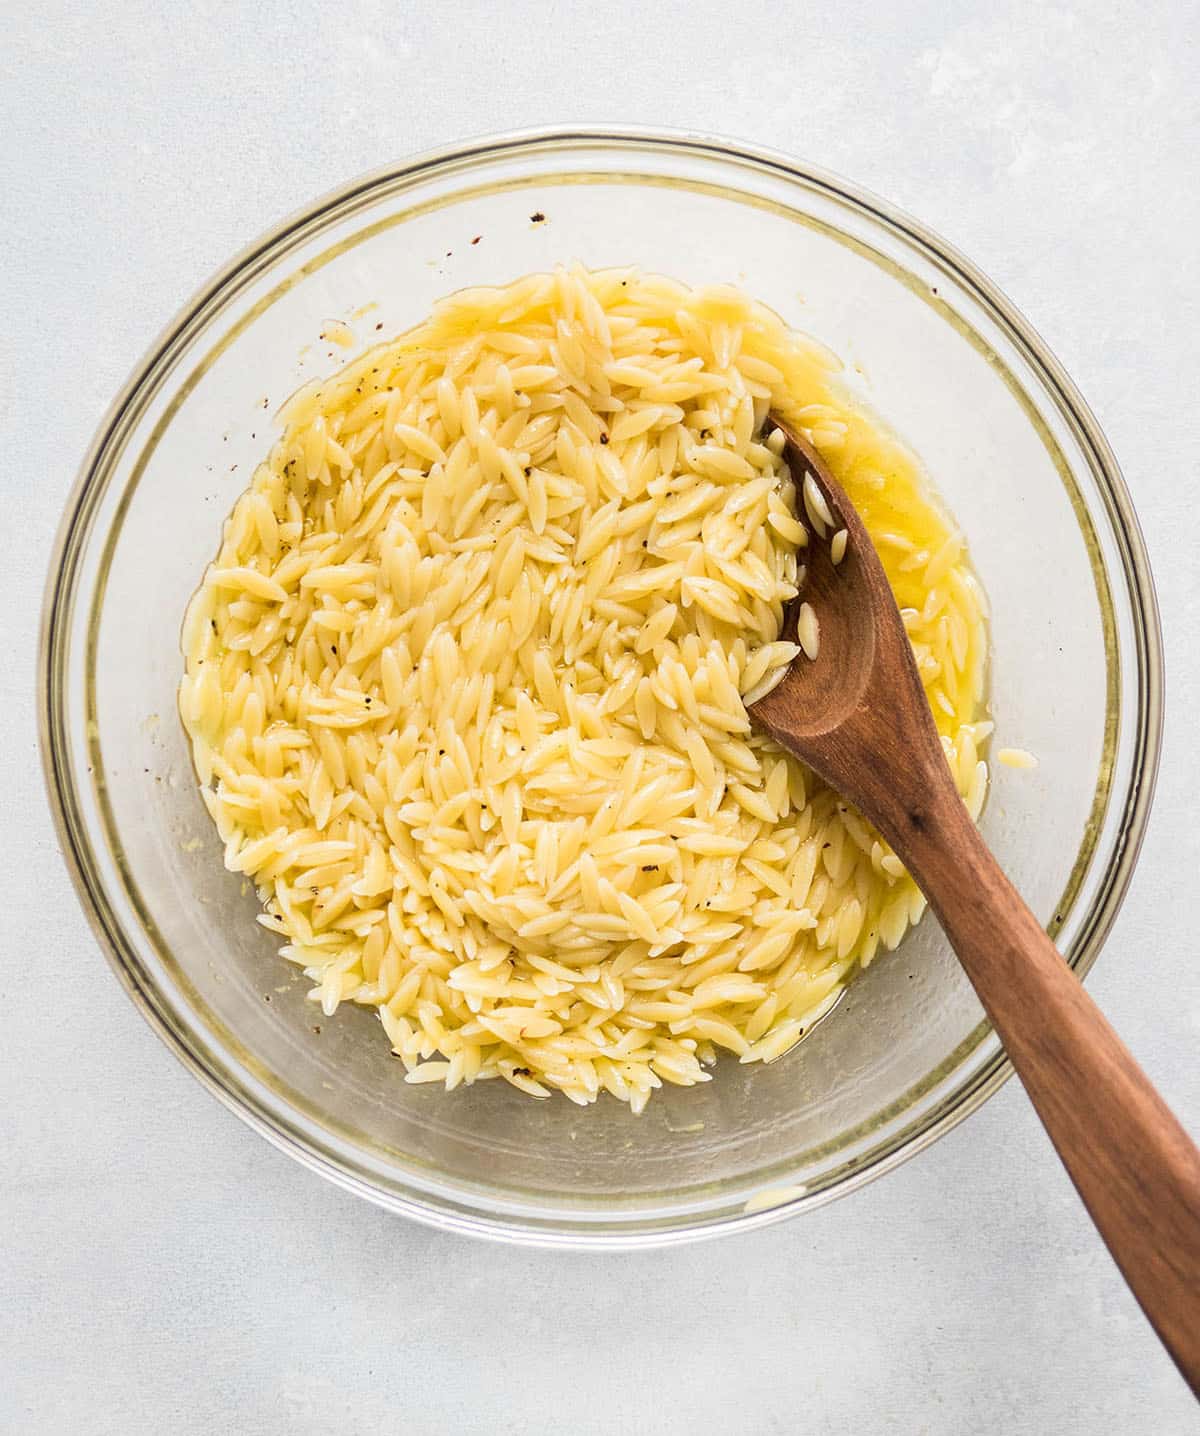 Cooked orzo in a glass bowl.